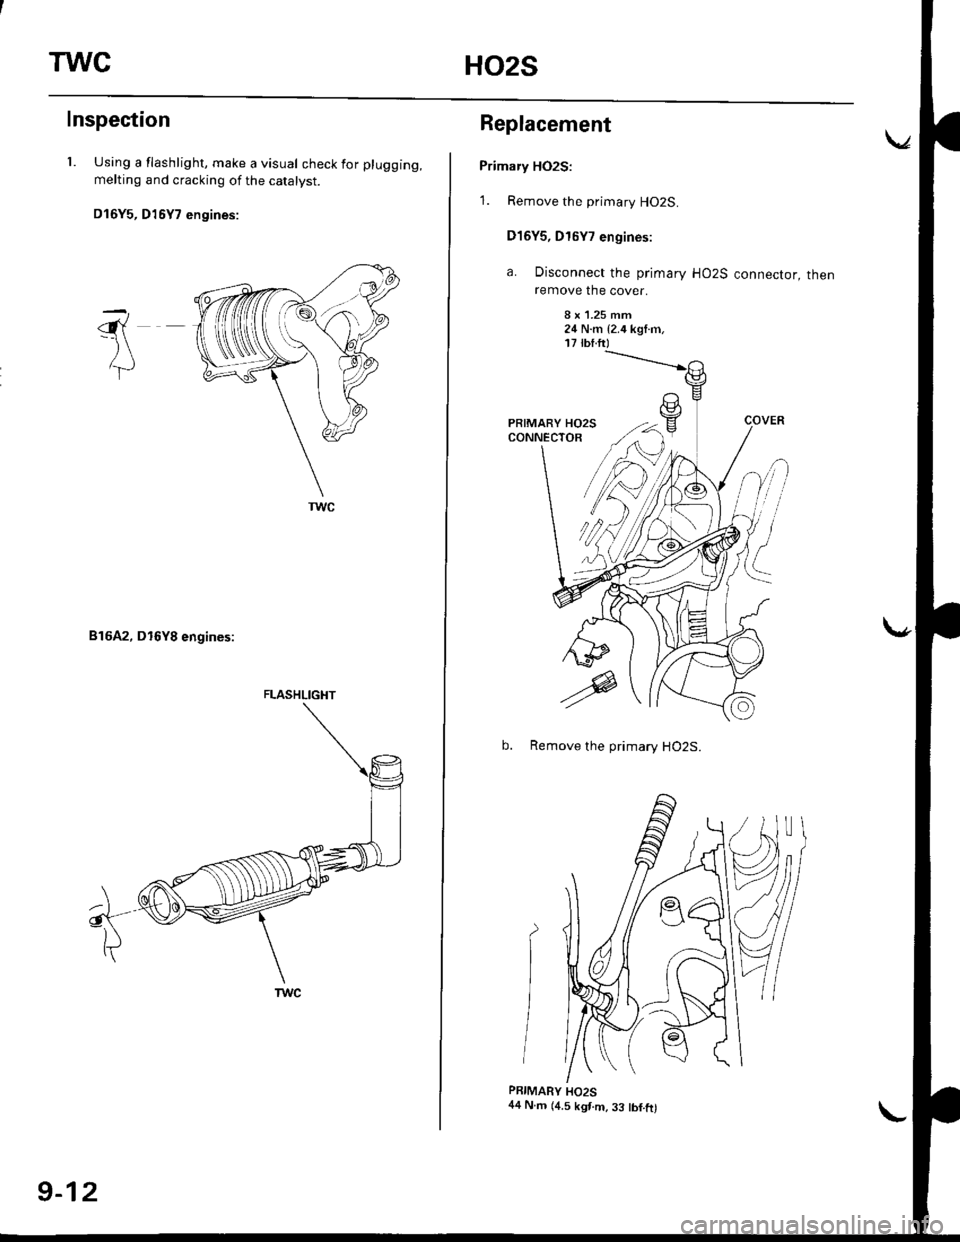 HONDA CIVIC 1996 6.G Workshop Manual TWCHO2S
Inspection
l. Using a flashlight, make a visual check for plugging,
melting and cracking of the catalyst.
D16Y5, D16Y7 engines:
816A2, D16Y8 engines:
-\6{-)\
lT
a
A
FLASHLIGI{T
9-12
Replacemen